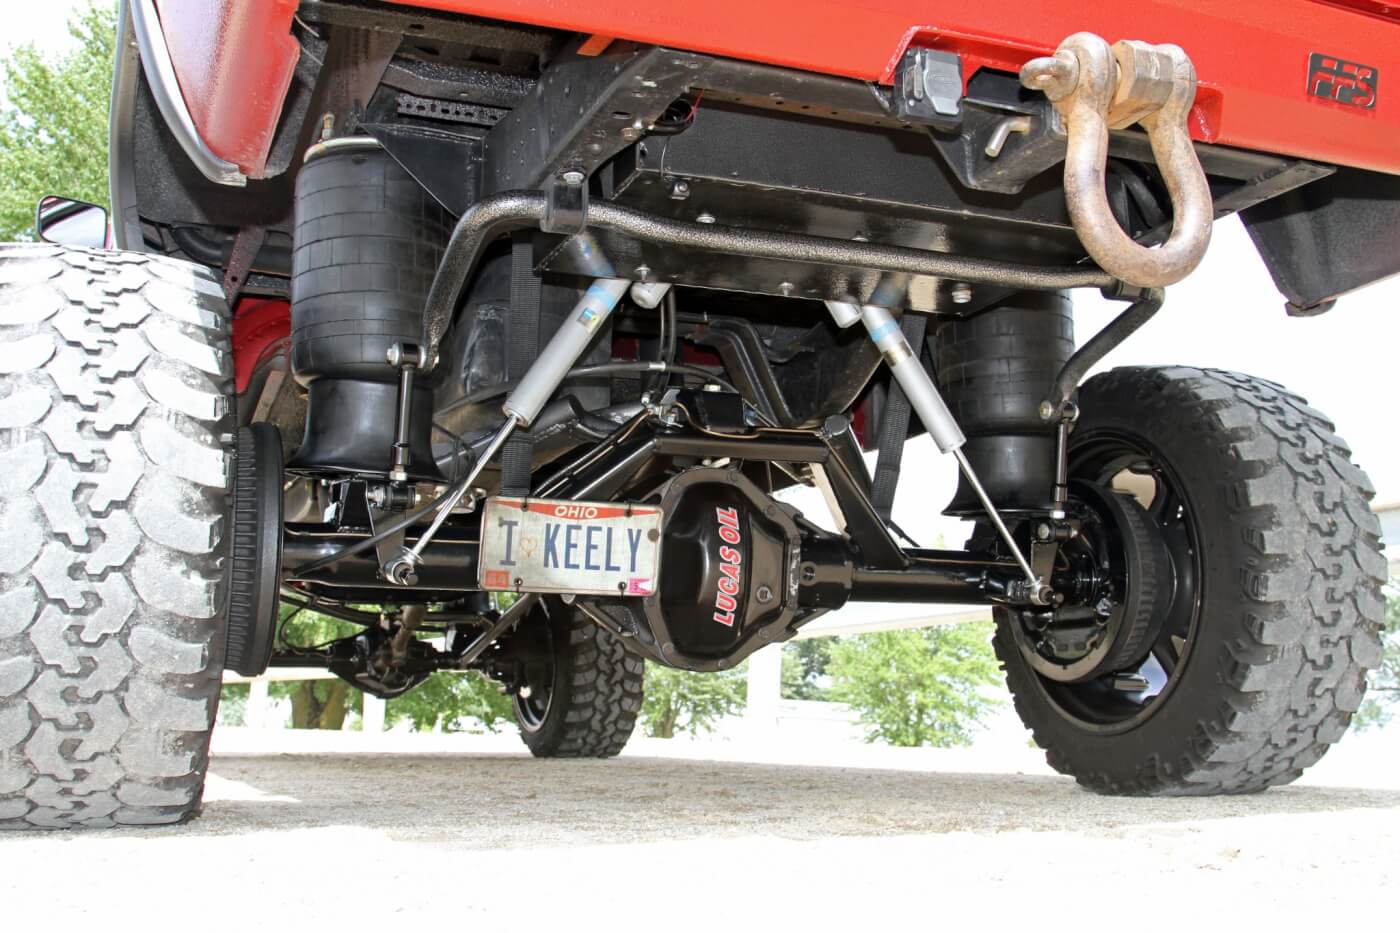 Looking under the rear of Reese’s truck, you can see the repurposed Hellwig anti-sway bar as well as the Bilstein shocks and massive 10-inch Firestone airbags all tied in to the Dana 80 axle.